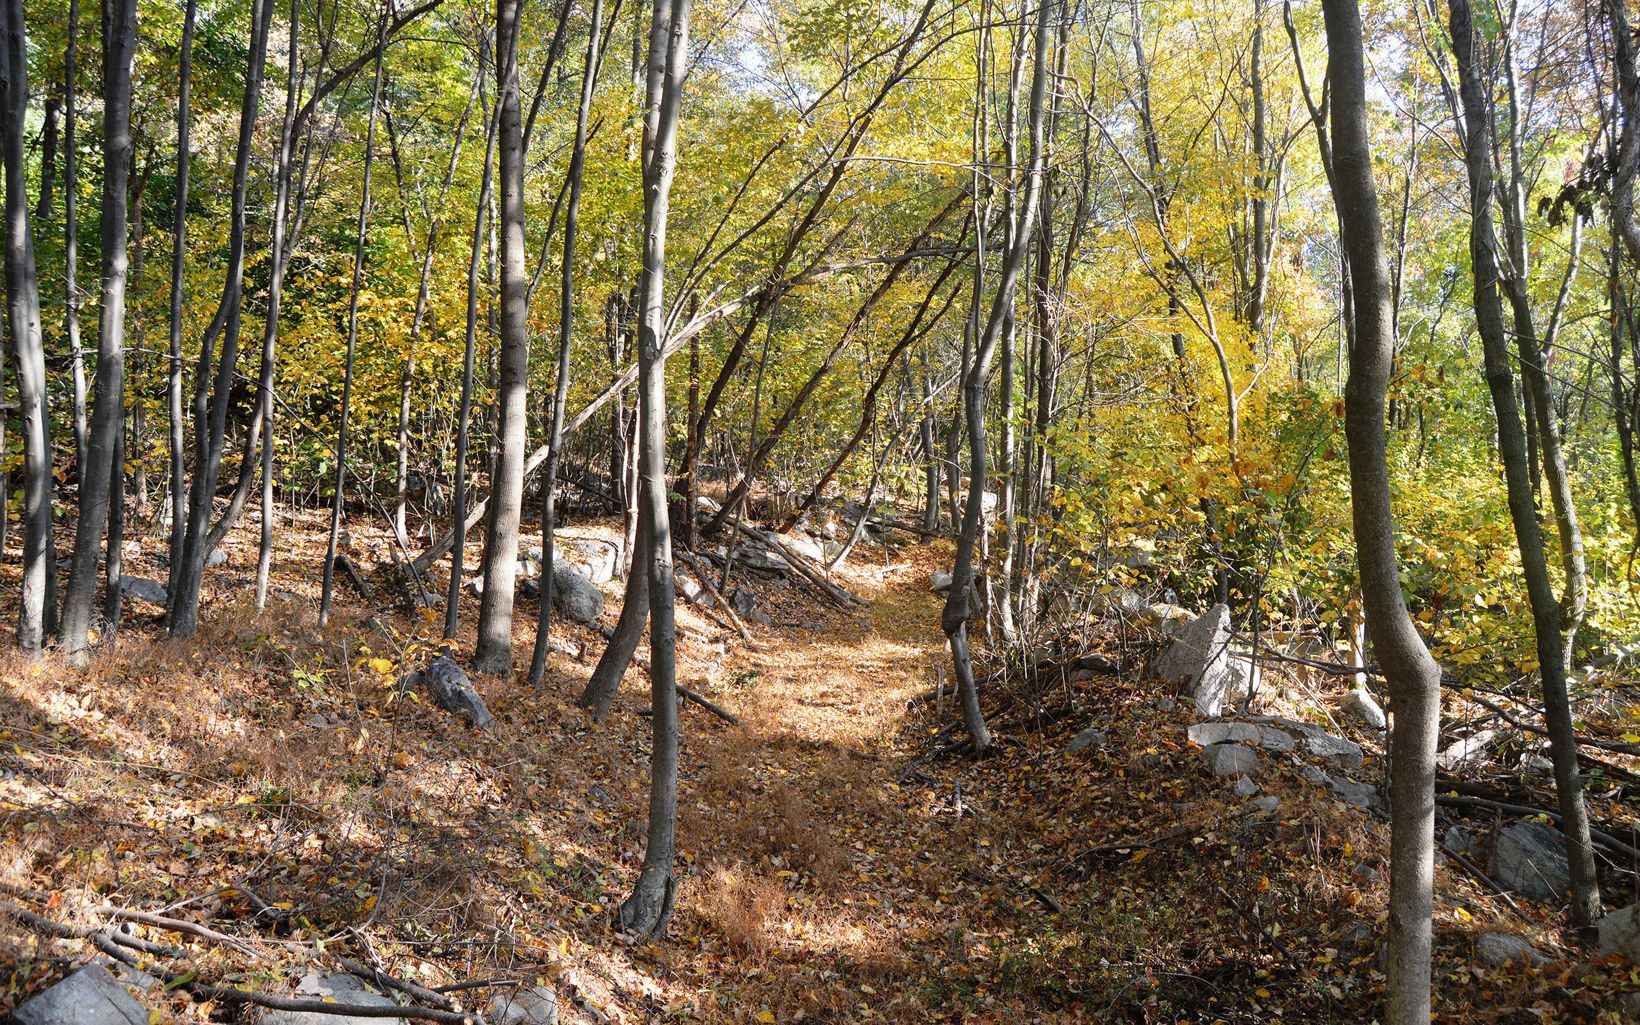 A path covered in leaves and pine needles curves through a forest. The leaves are just beginning to turn gold.